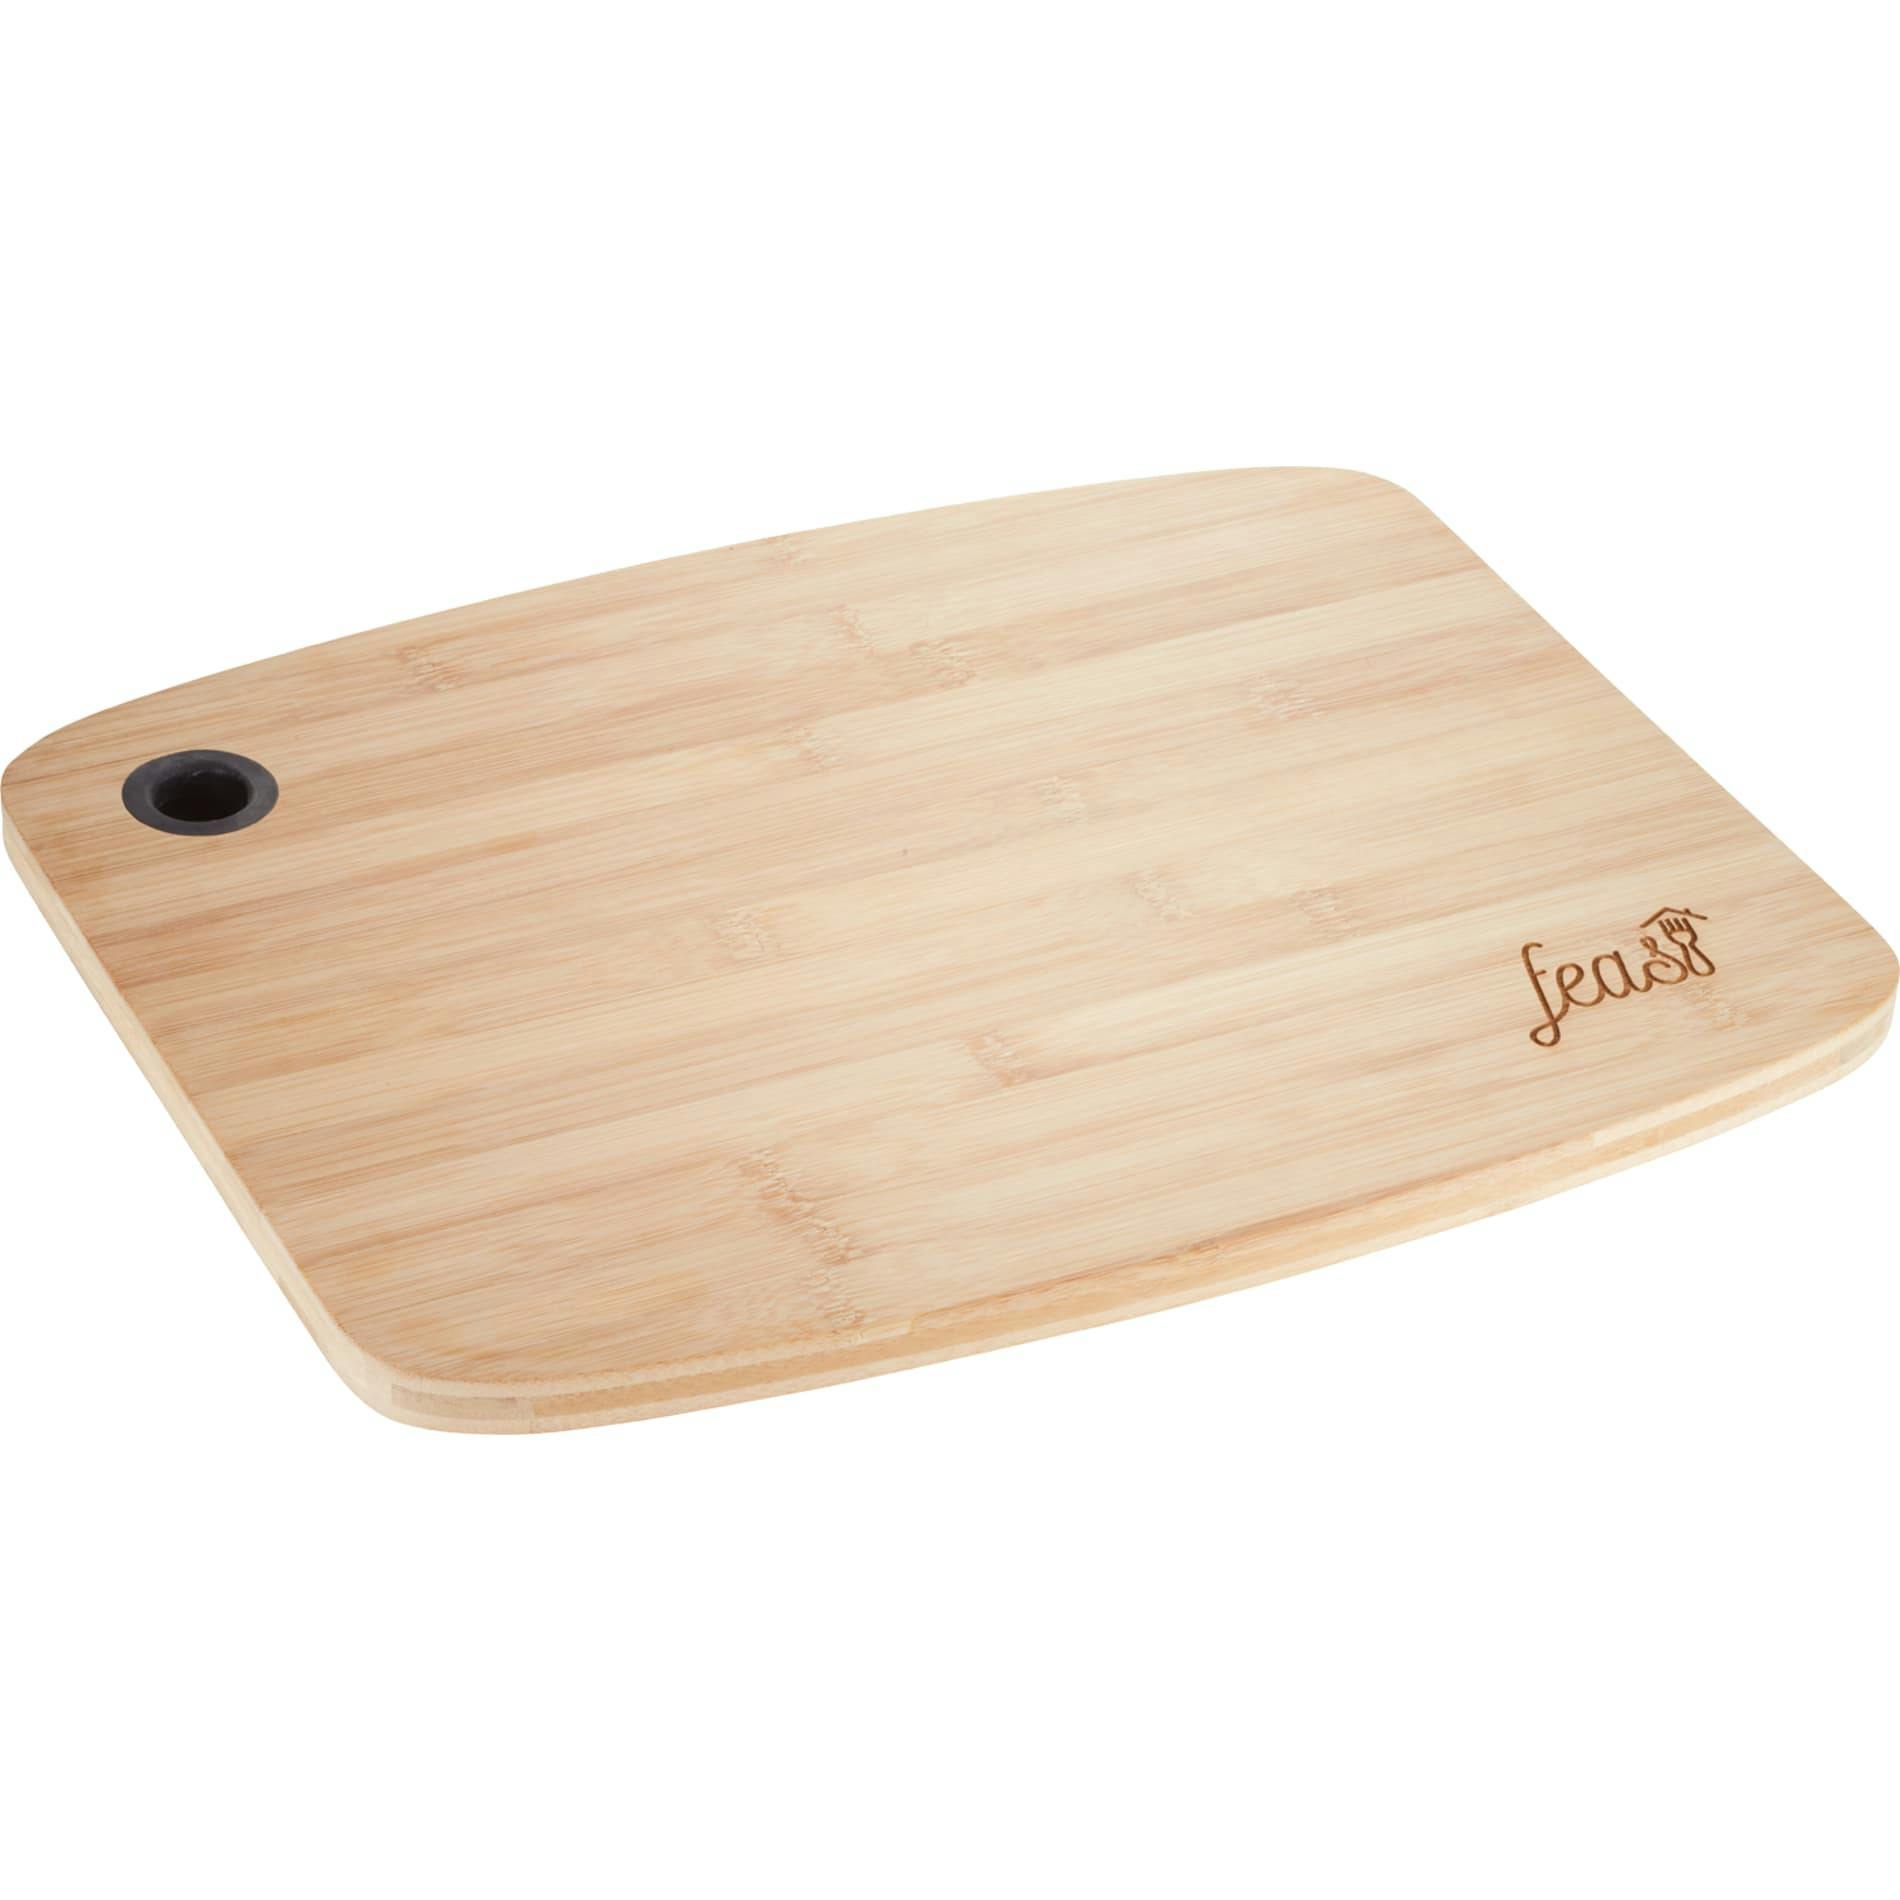 FSC Large Bamboo Cutting Board with Silicone Grip - additional Image 2